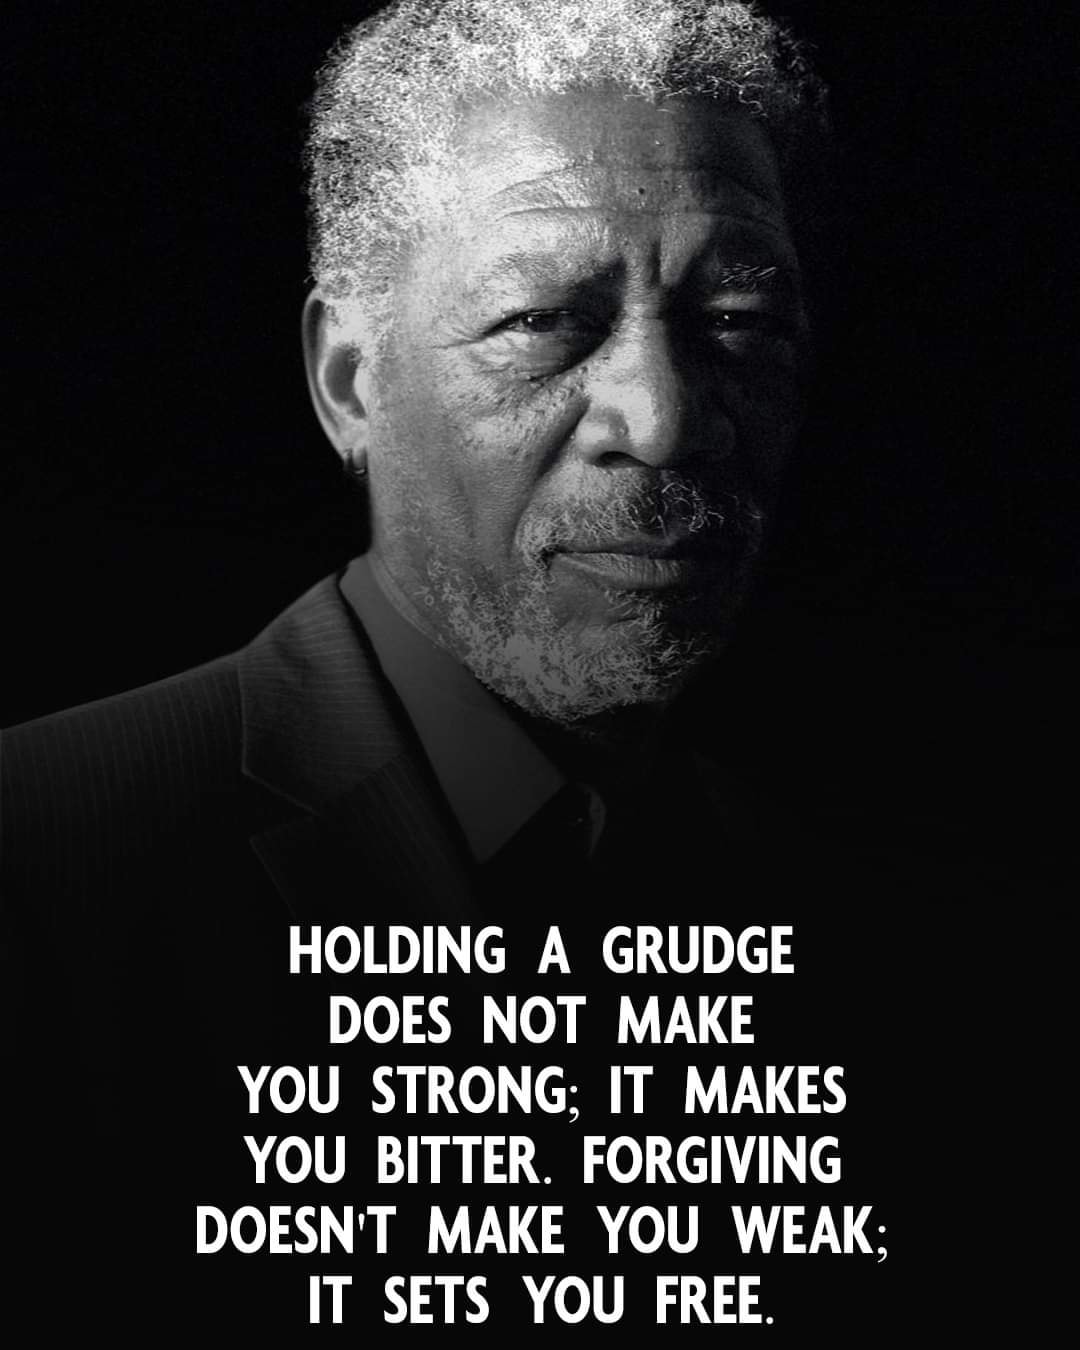 Holding a grudge doesn’t make you stronger; it makes you bitter. Forgiving doesn’t make you weak, it sets you free. – Dave Willis